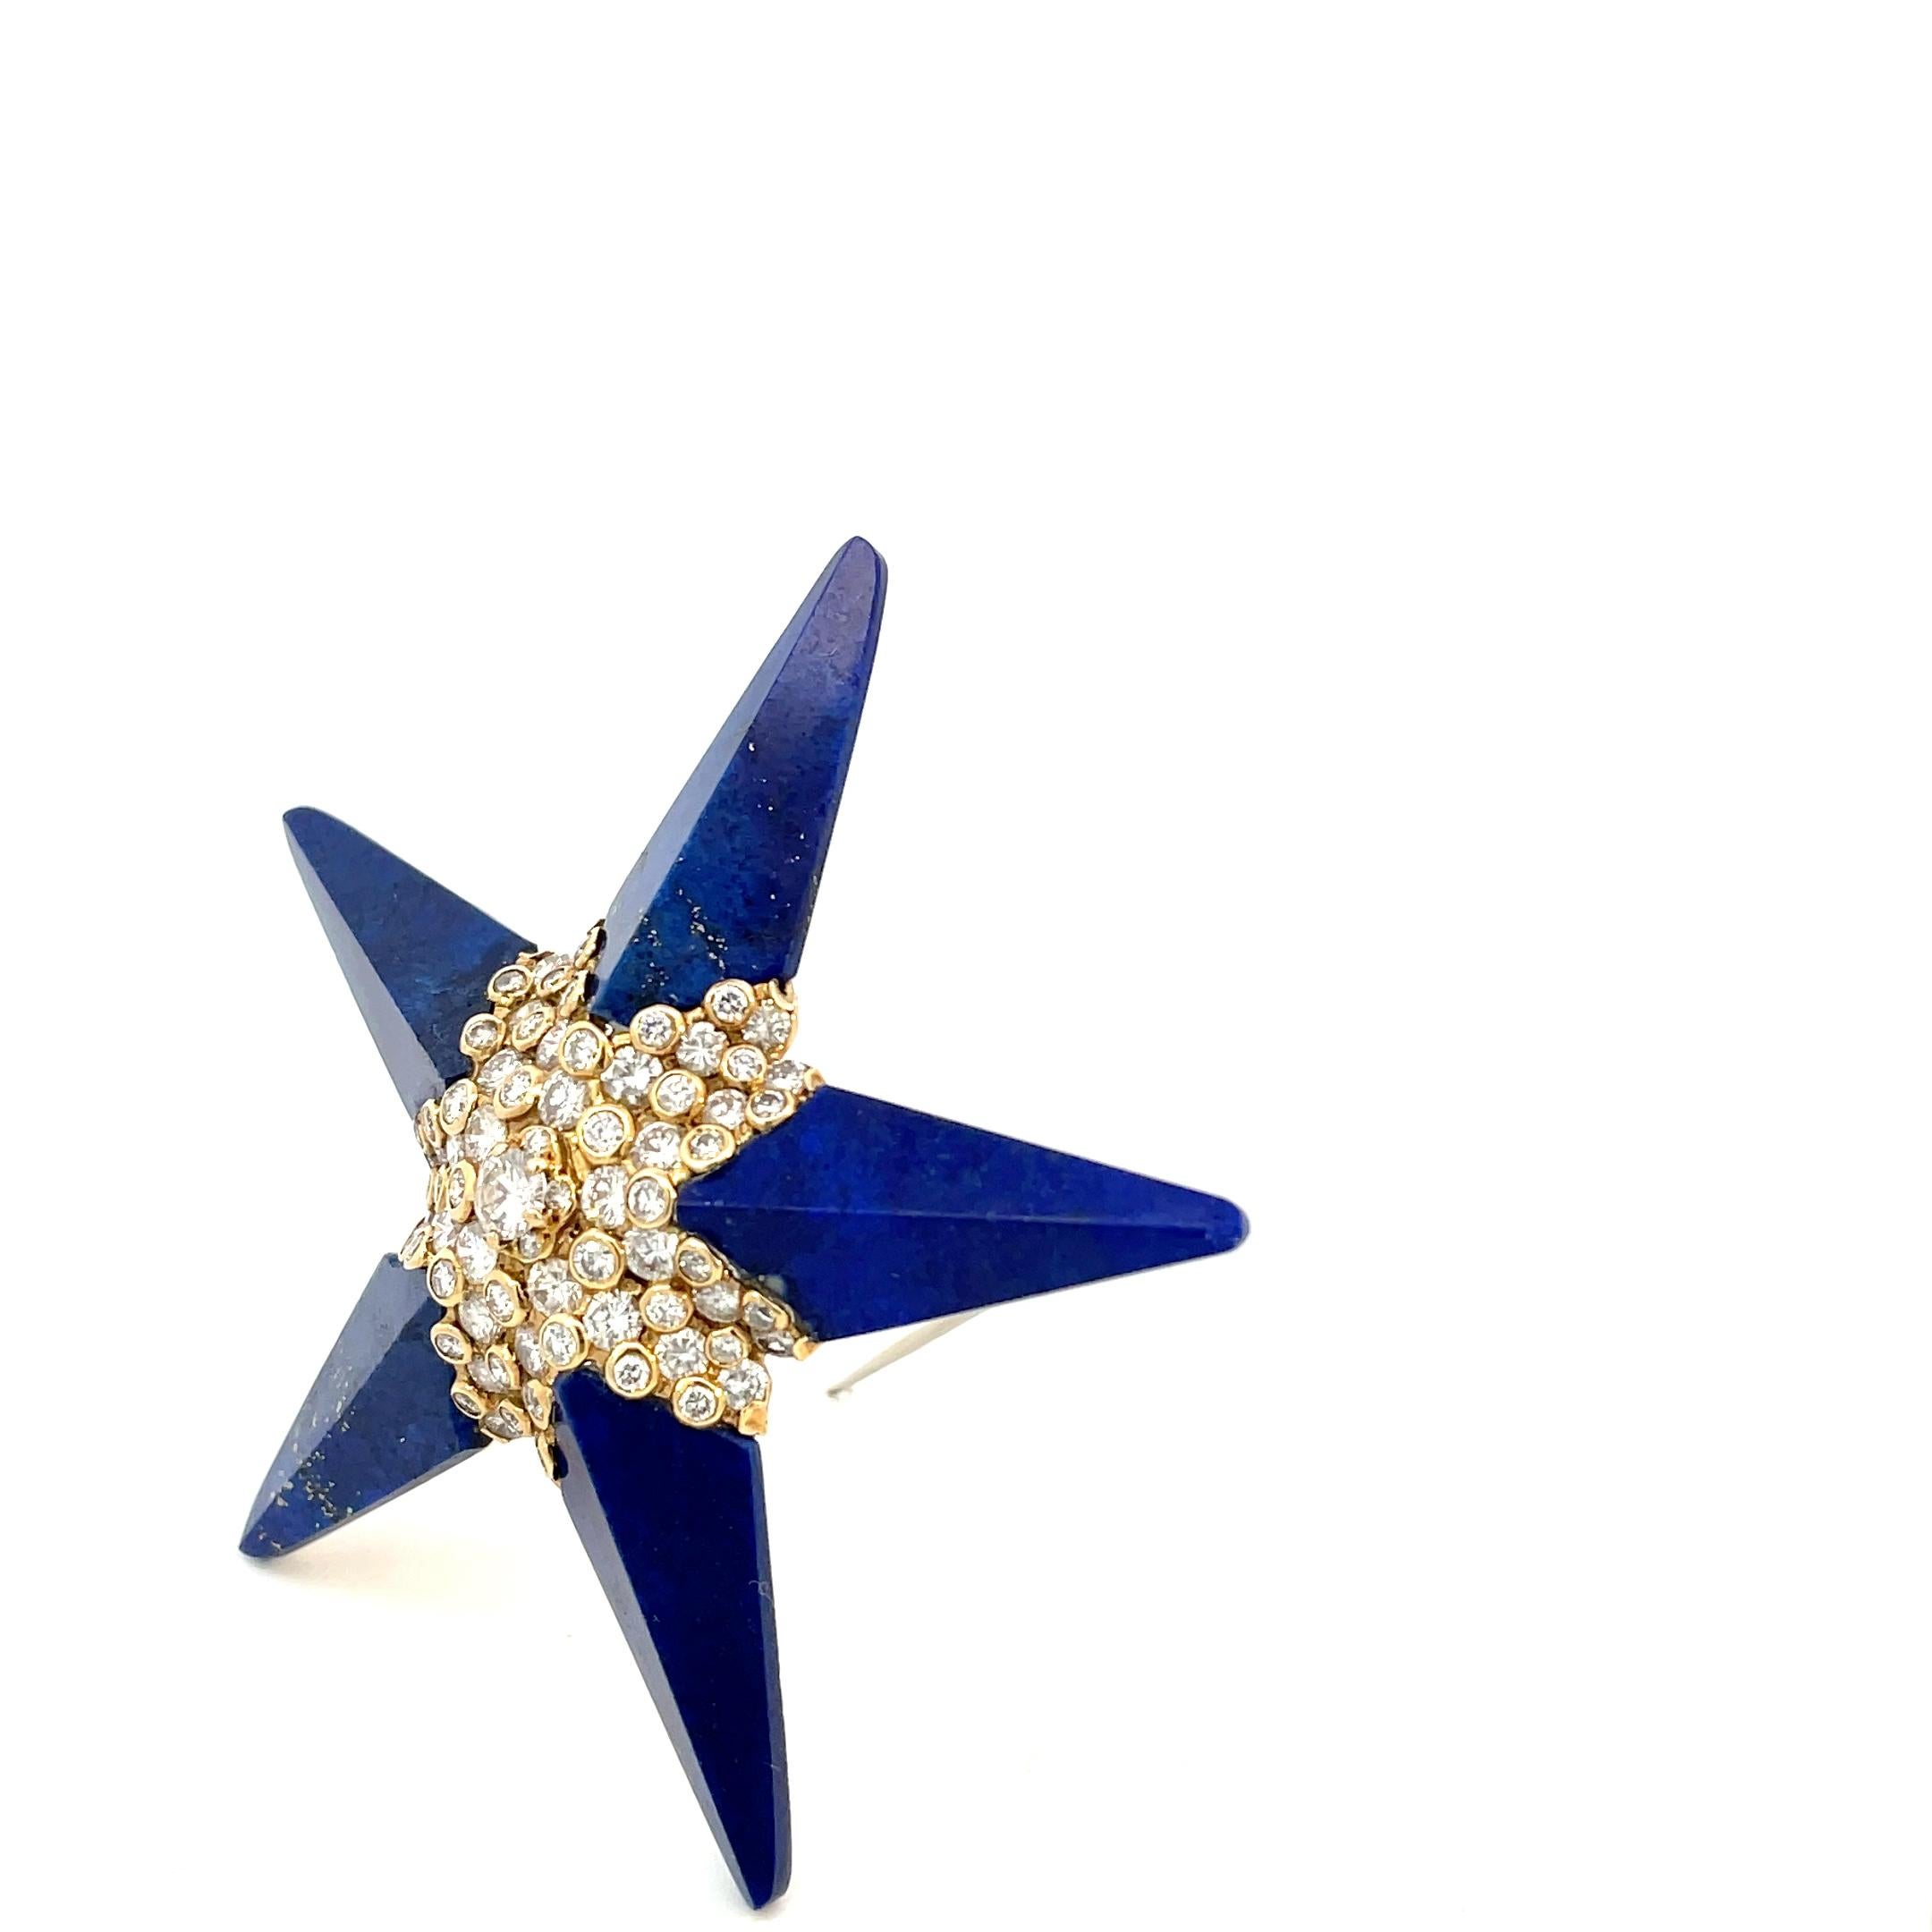 Unique 1970's Cartier Star Pendant Brooch.
Designed as a star, set with carved lapis, accented by round diamonds.
This stunning Brooch can be worn as a Pendant as well as a Brooch.

Diameter 2⅜ inches
Diamonds weighing a total of approximately 4.00